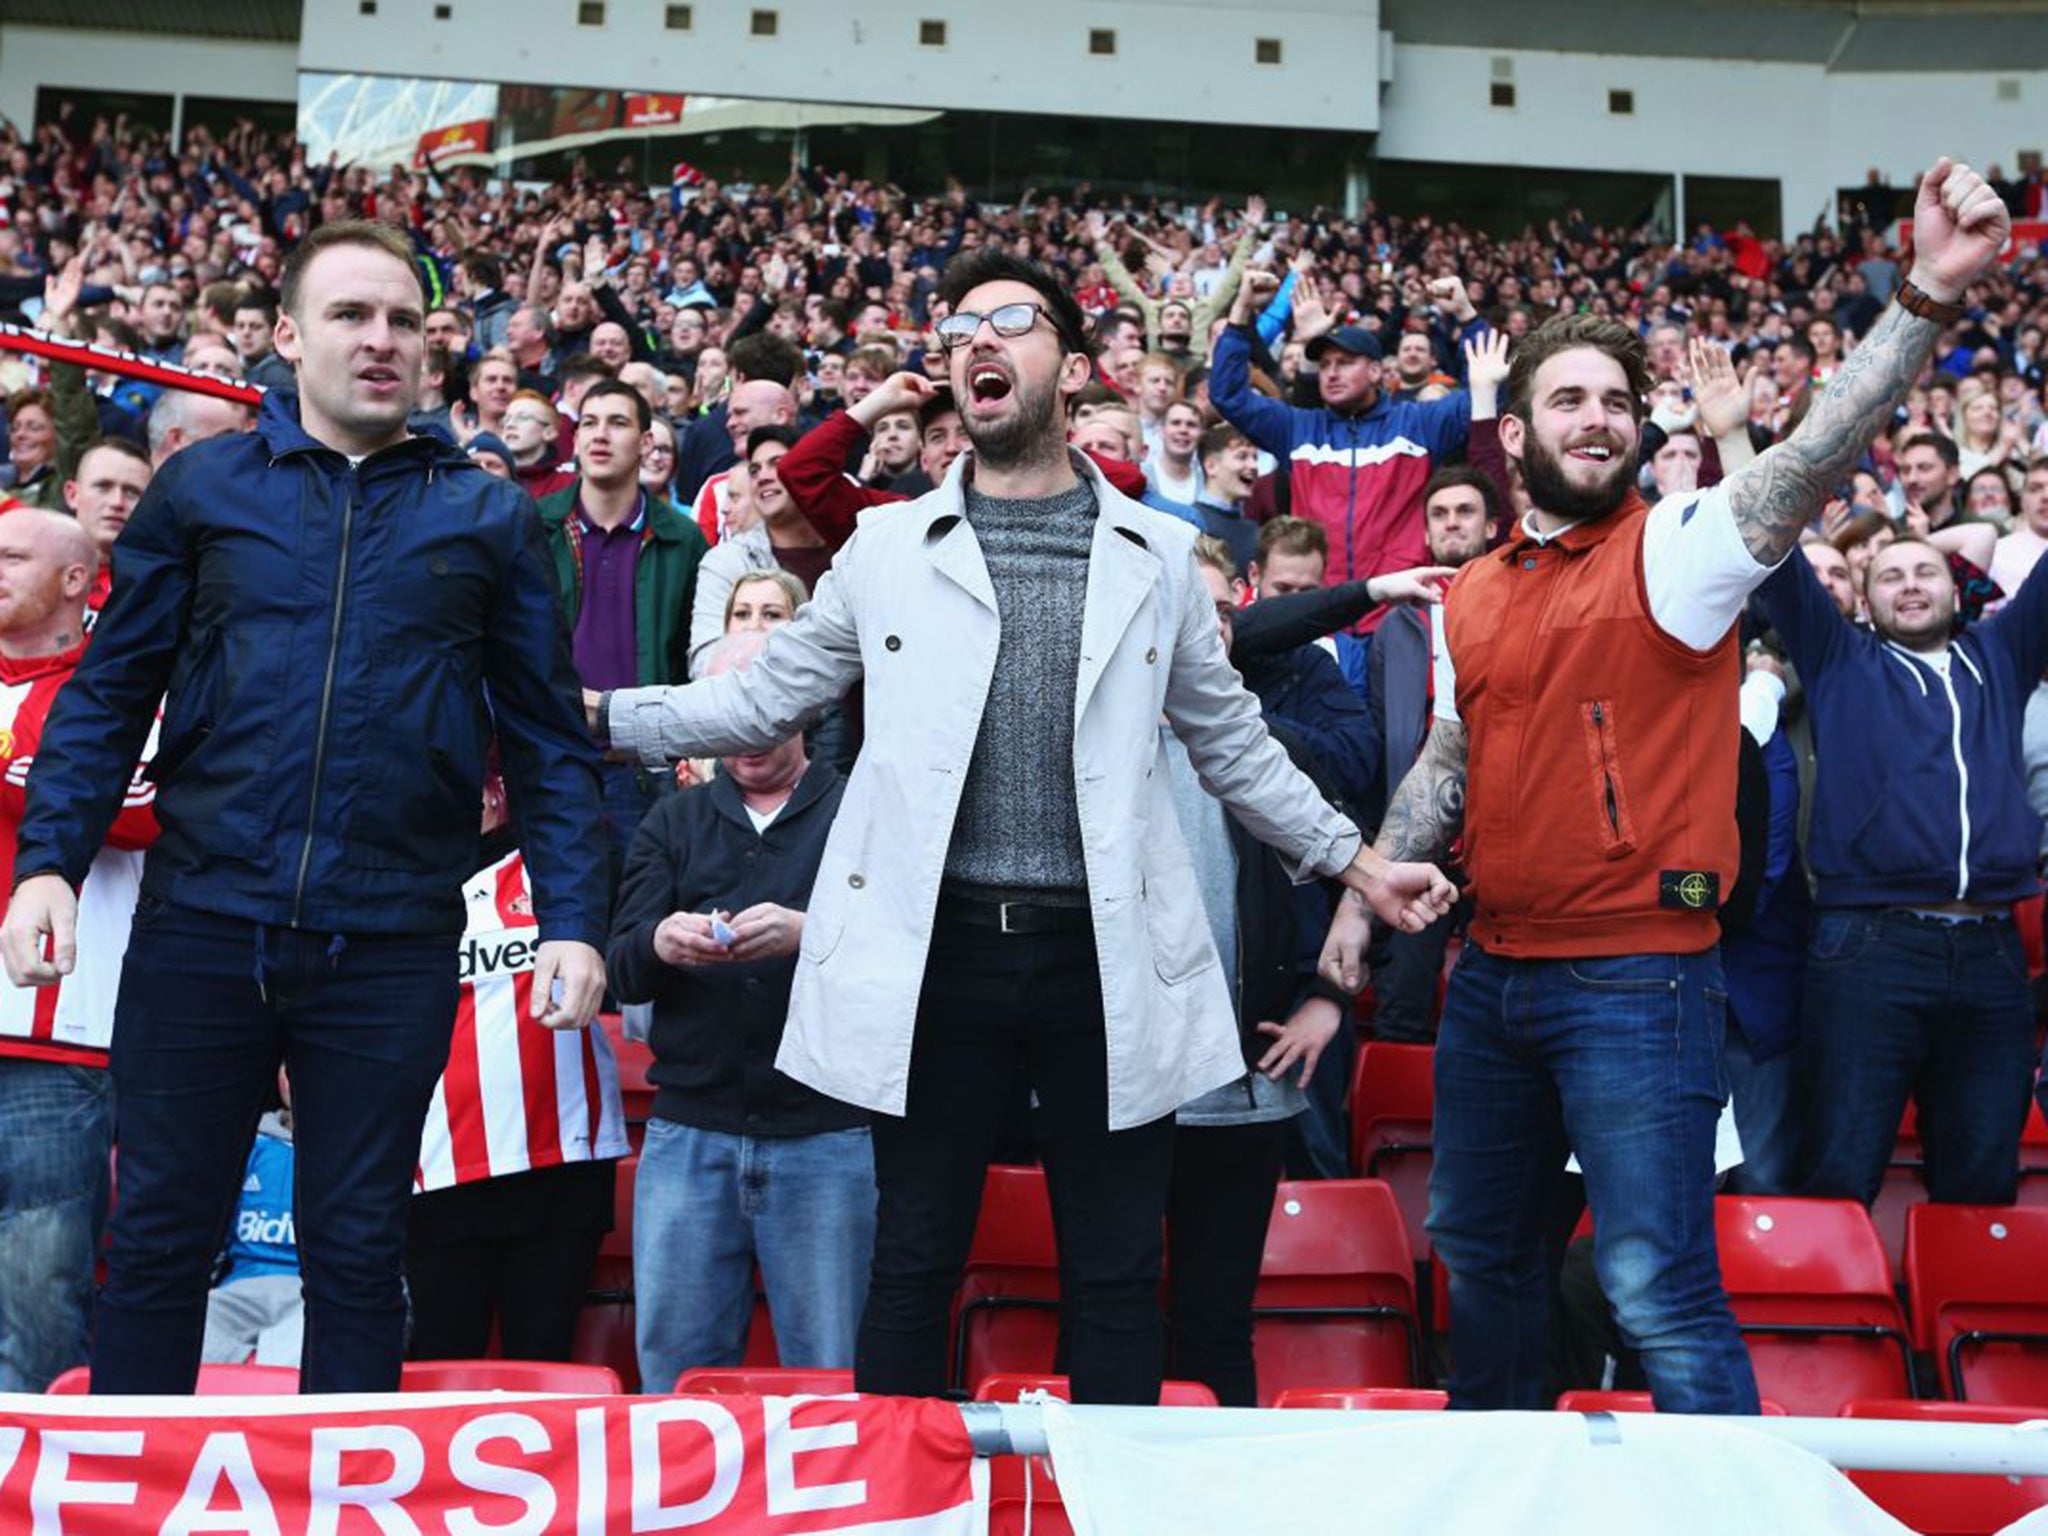 Sunderland fans celebrate victory over their North-east rivals Newcastle. Both clubs retain buoyant attendances, despite dreadful results this season